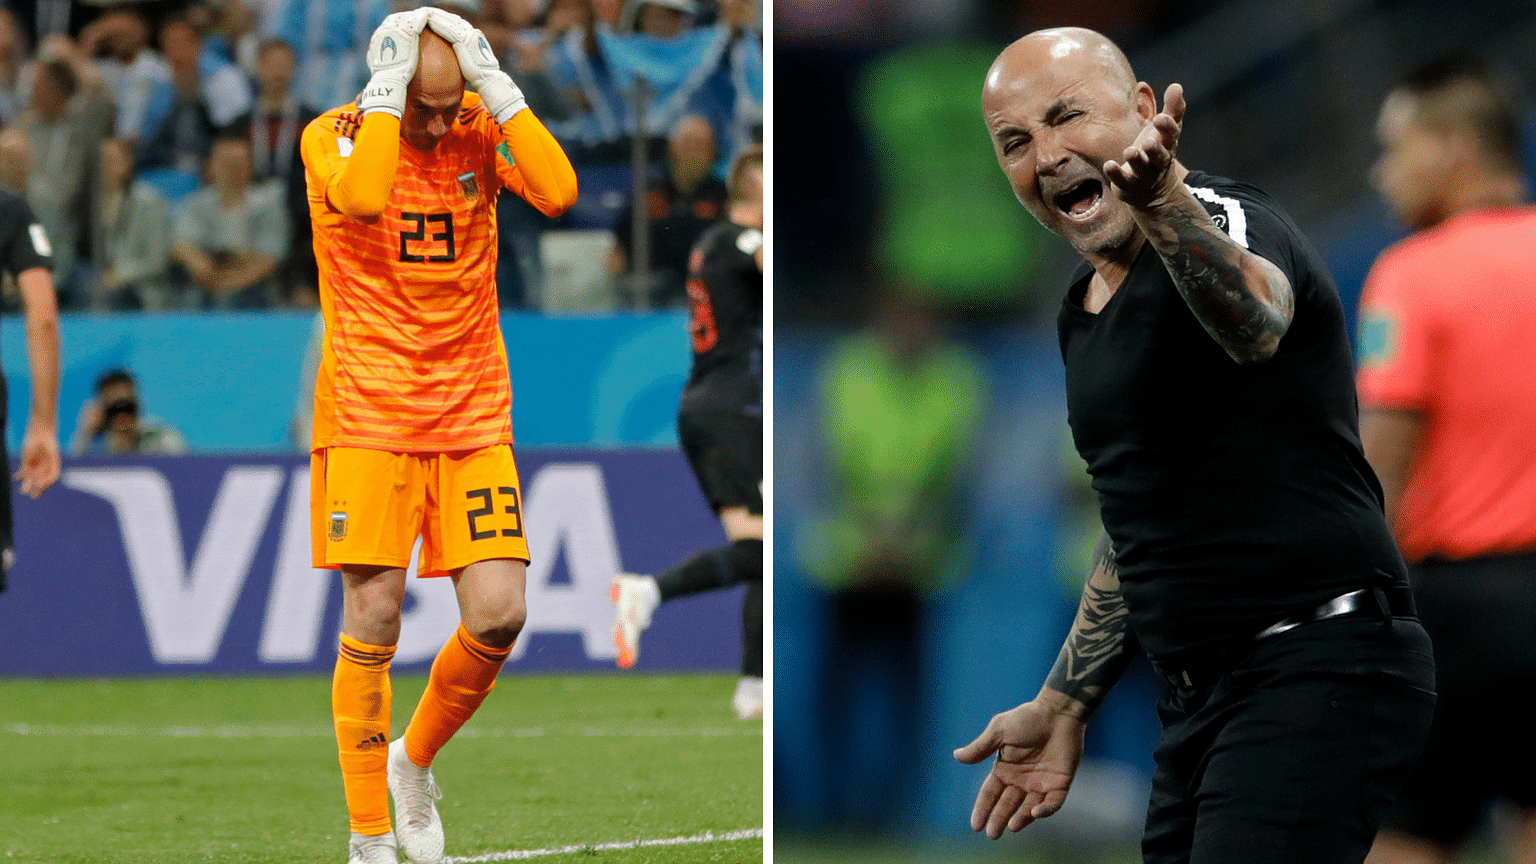 FIFA World Cup 2018: Argentina keeper Willy Caballero and coach Jorge Sampaoli were criticised after Argentina lost to Croatia on Thursday night.